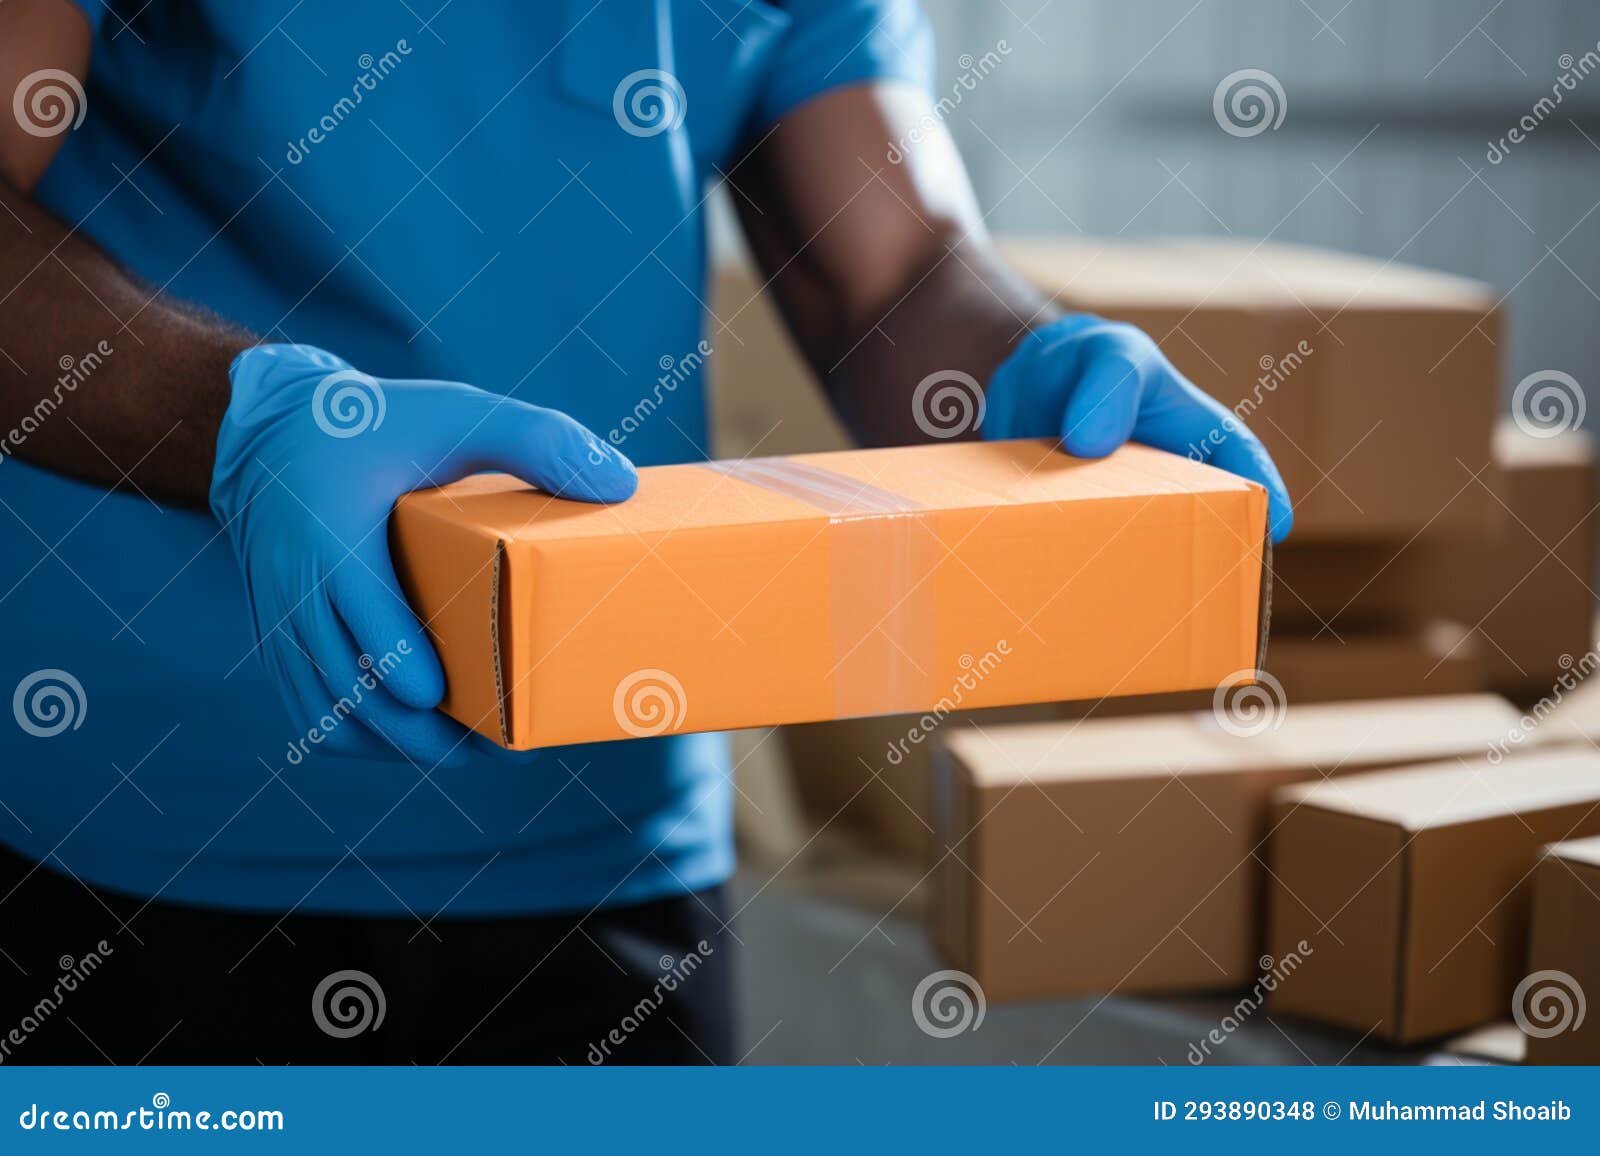 Closeup Hands in Rubber Gloves Handle Cardboard Boxes for Fast Online  Shopping Delivery Stock Illustration - Illustration of glove, fast:  293890348